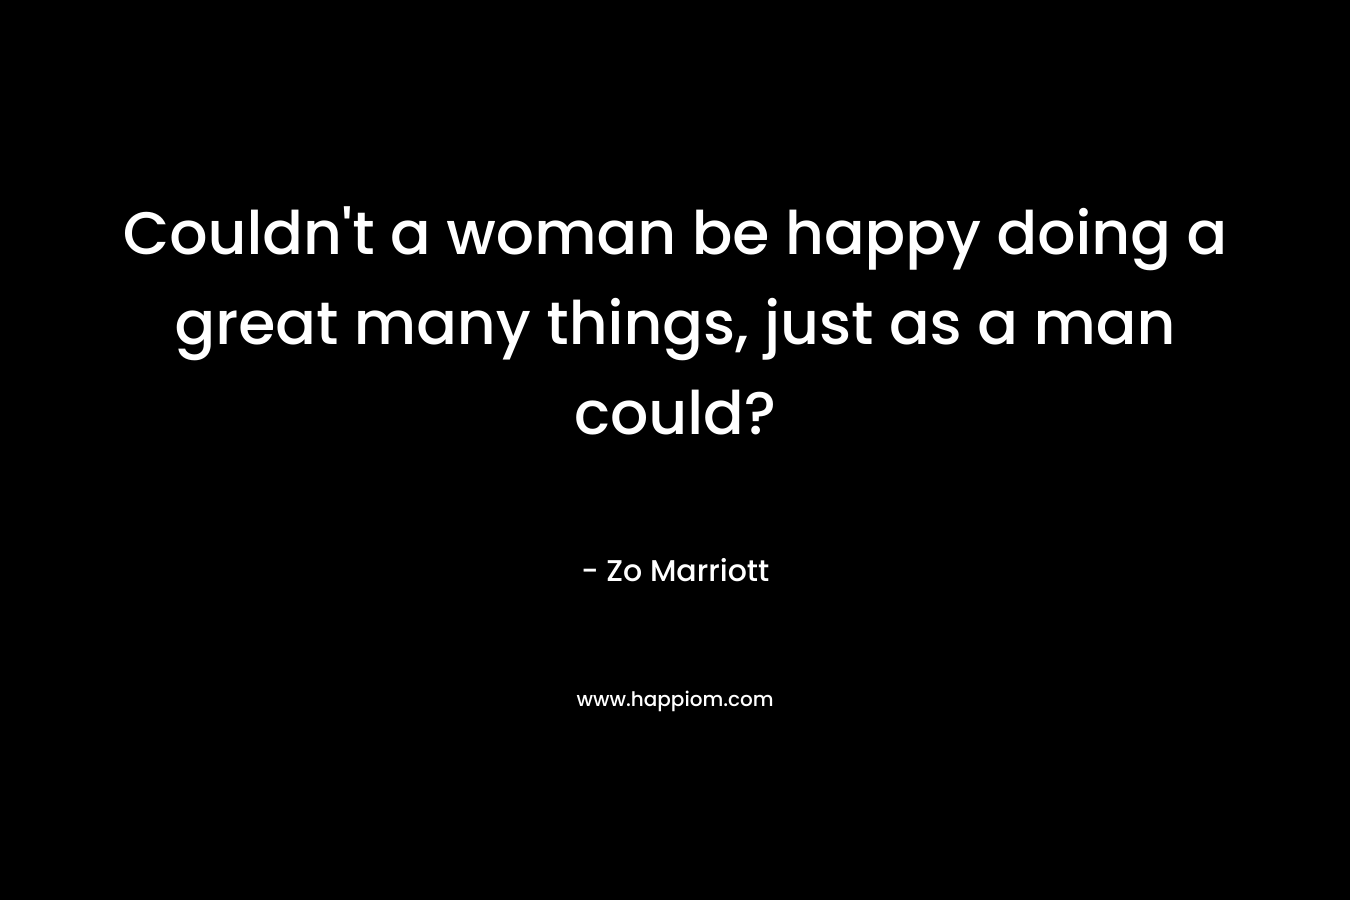 Couldn’t a woman be happy doing a great many things, just as a man could? – Zo Marriott